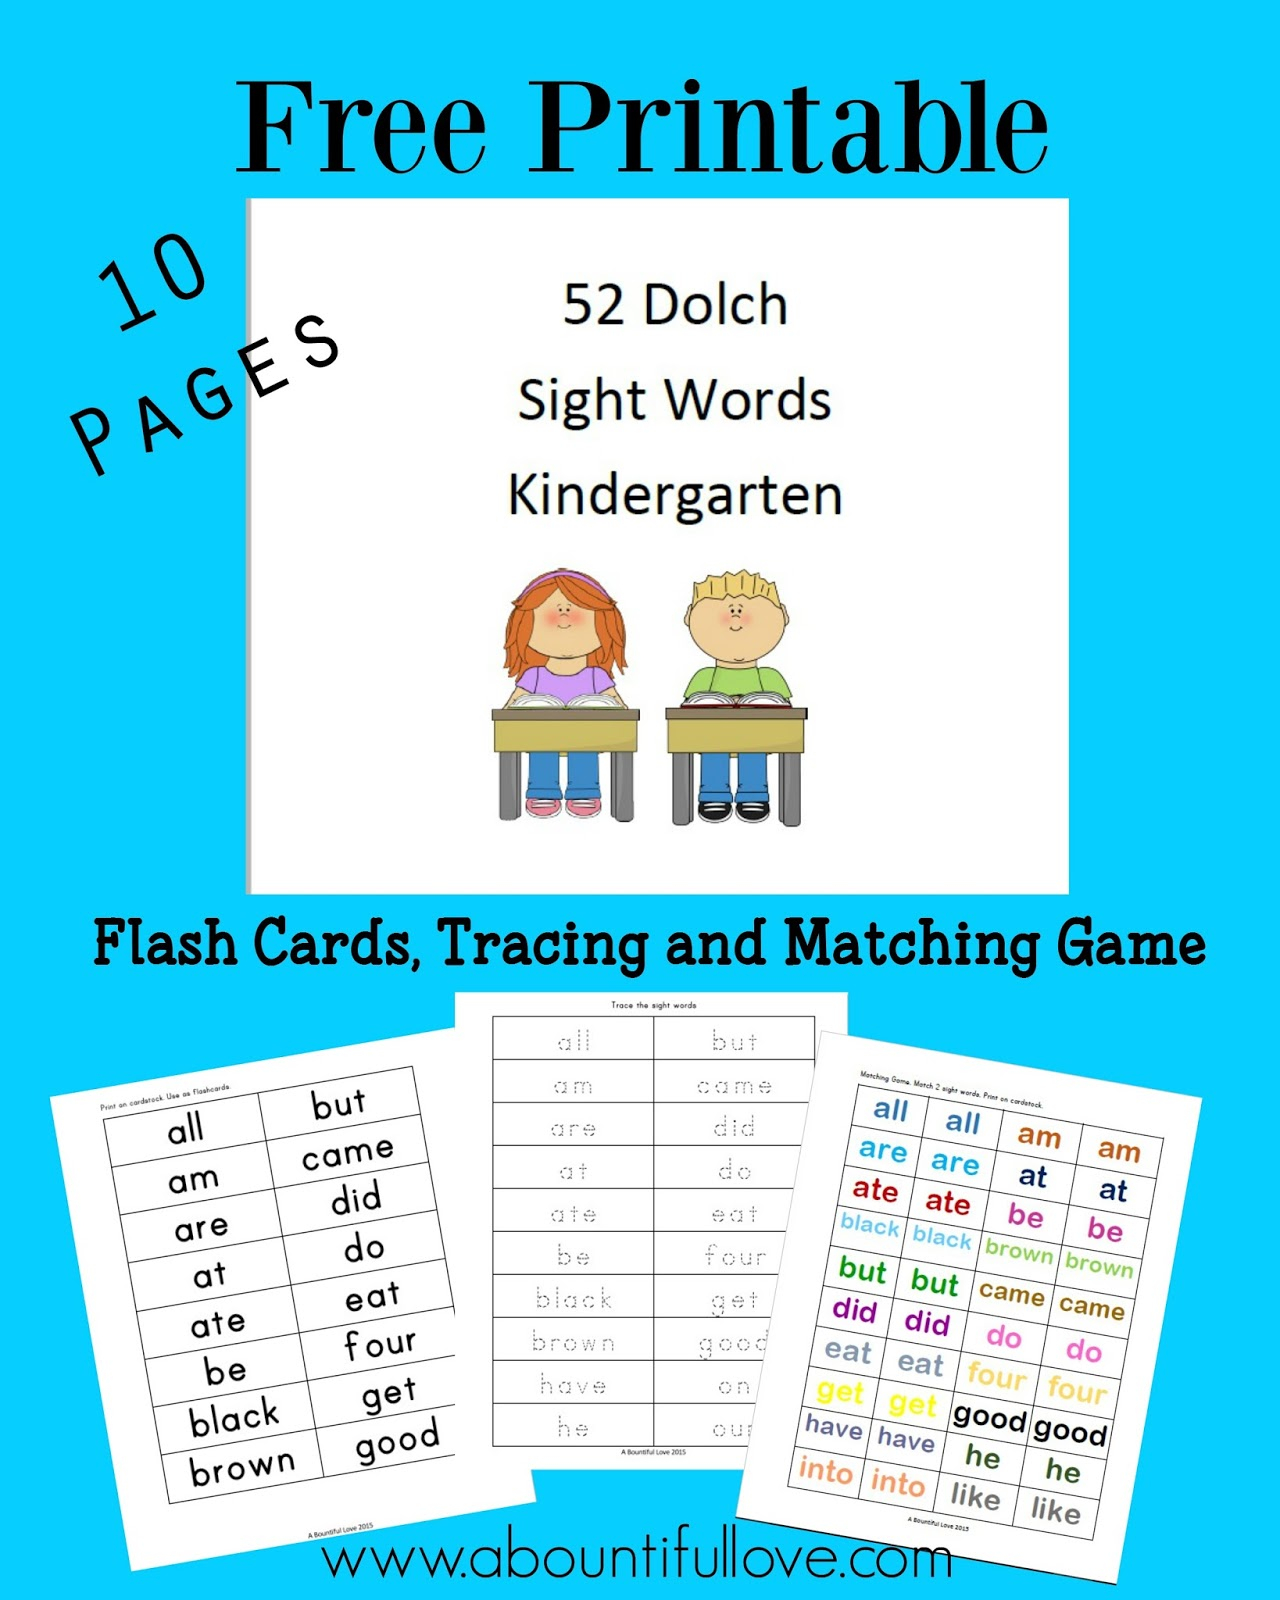 46 Dolch Sight Words For Second Grade A Bountiful Love